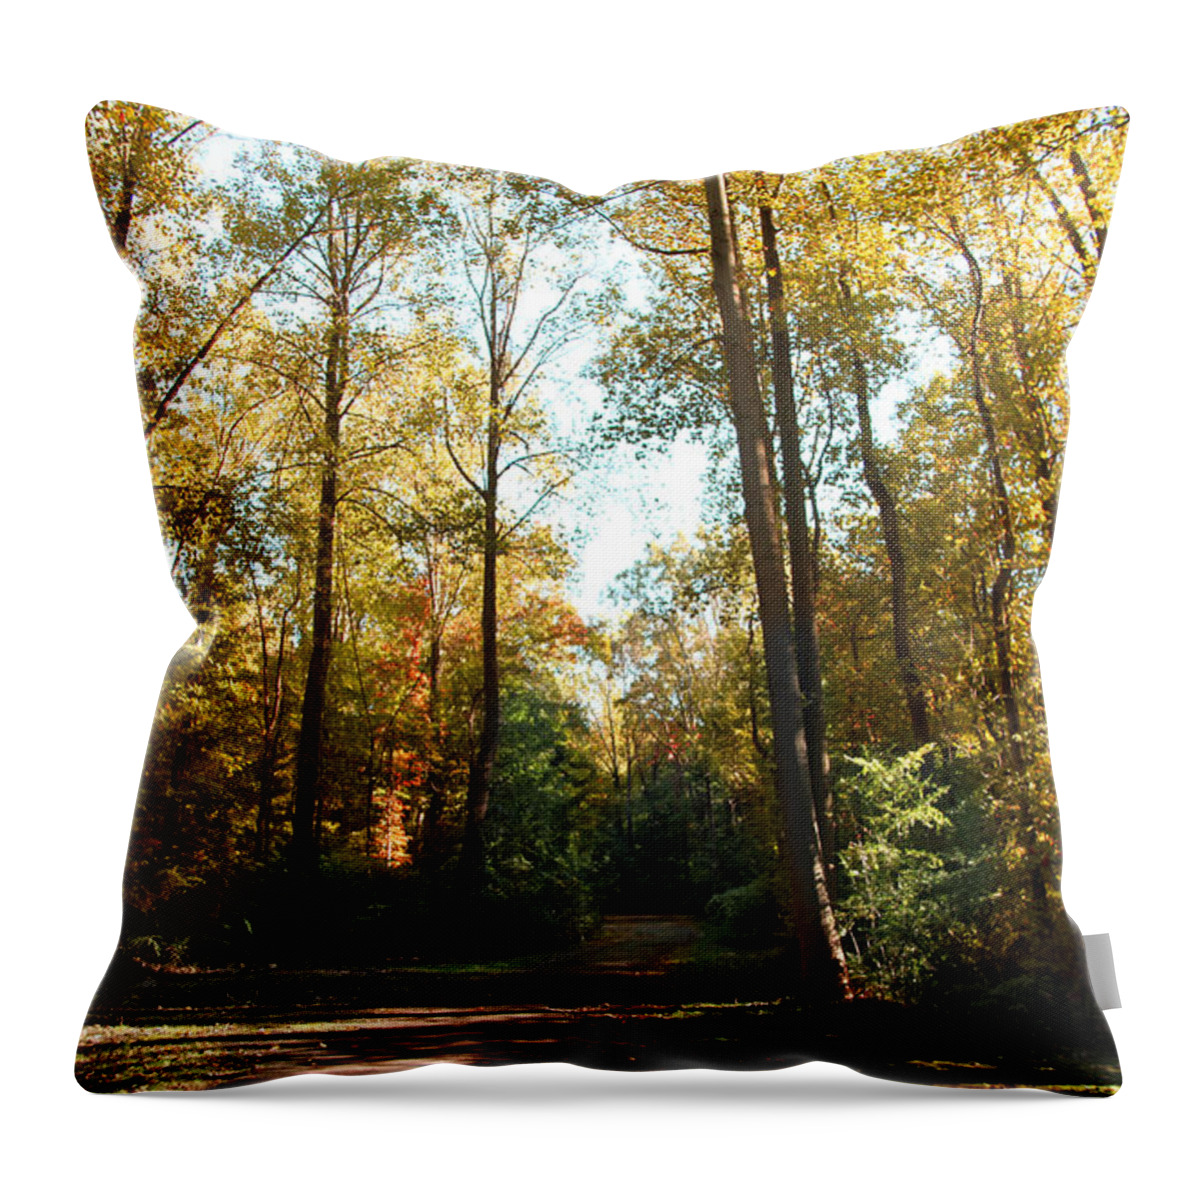 Landscape Throw Pillow featuring the photograph Forest Walk by Joseph G Holland